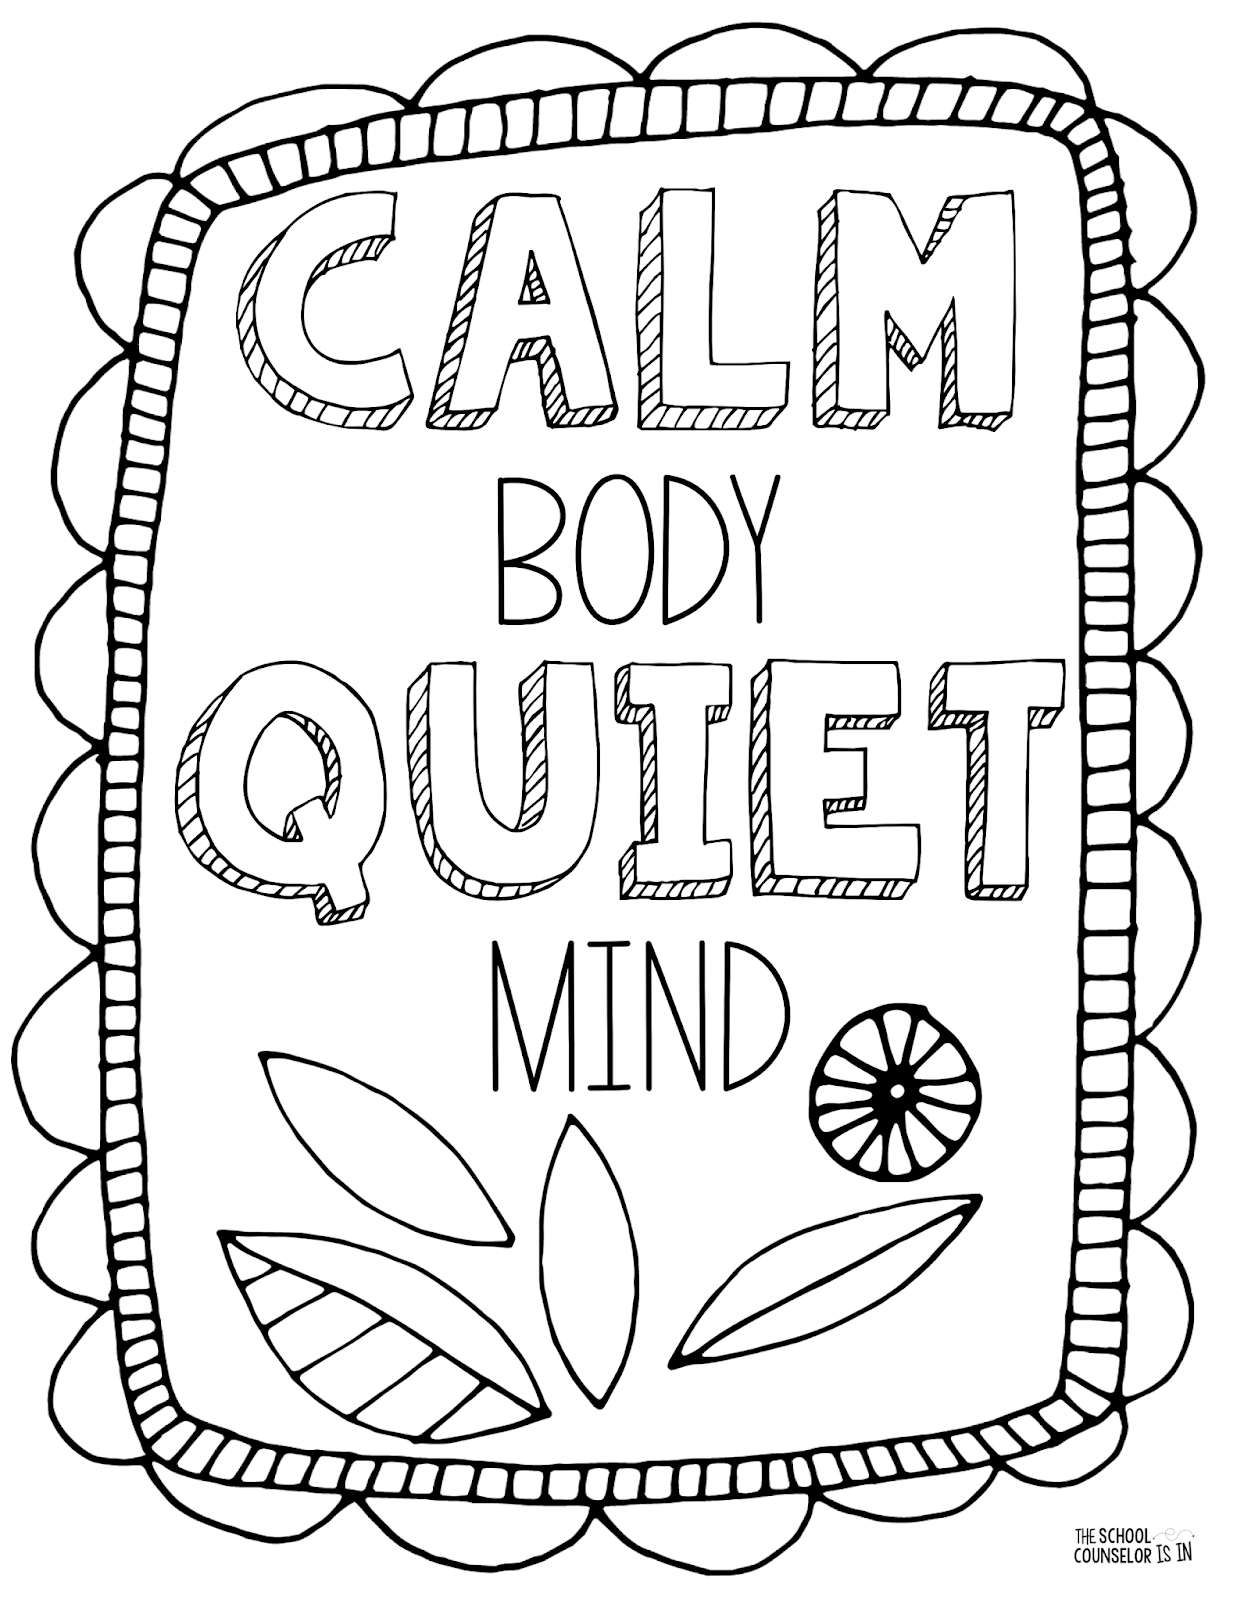 the-school-counselor-is-in-mindfulness-coloring-sheets